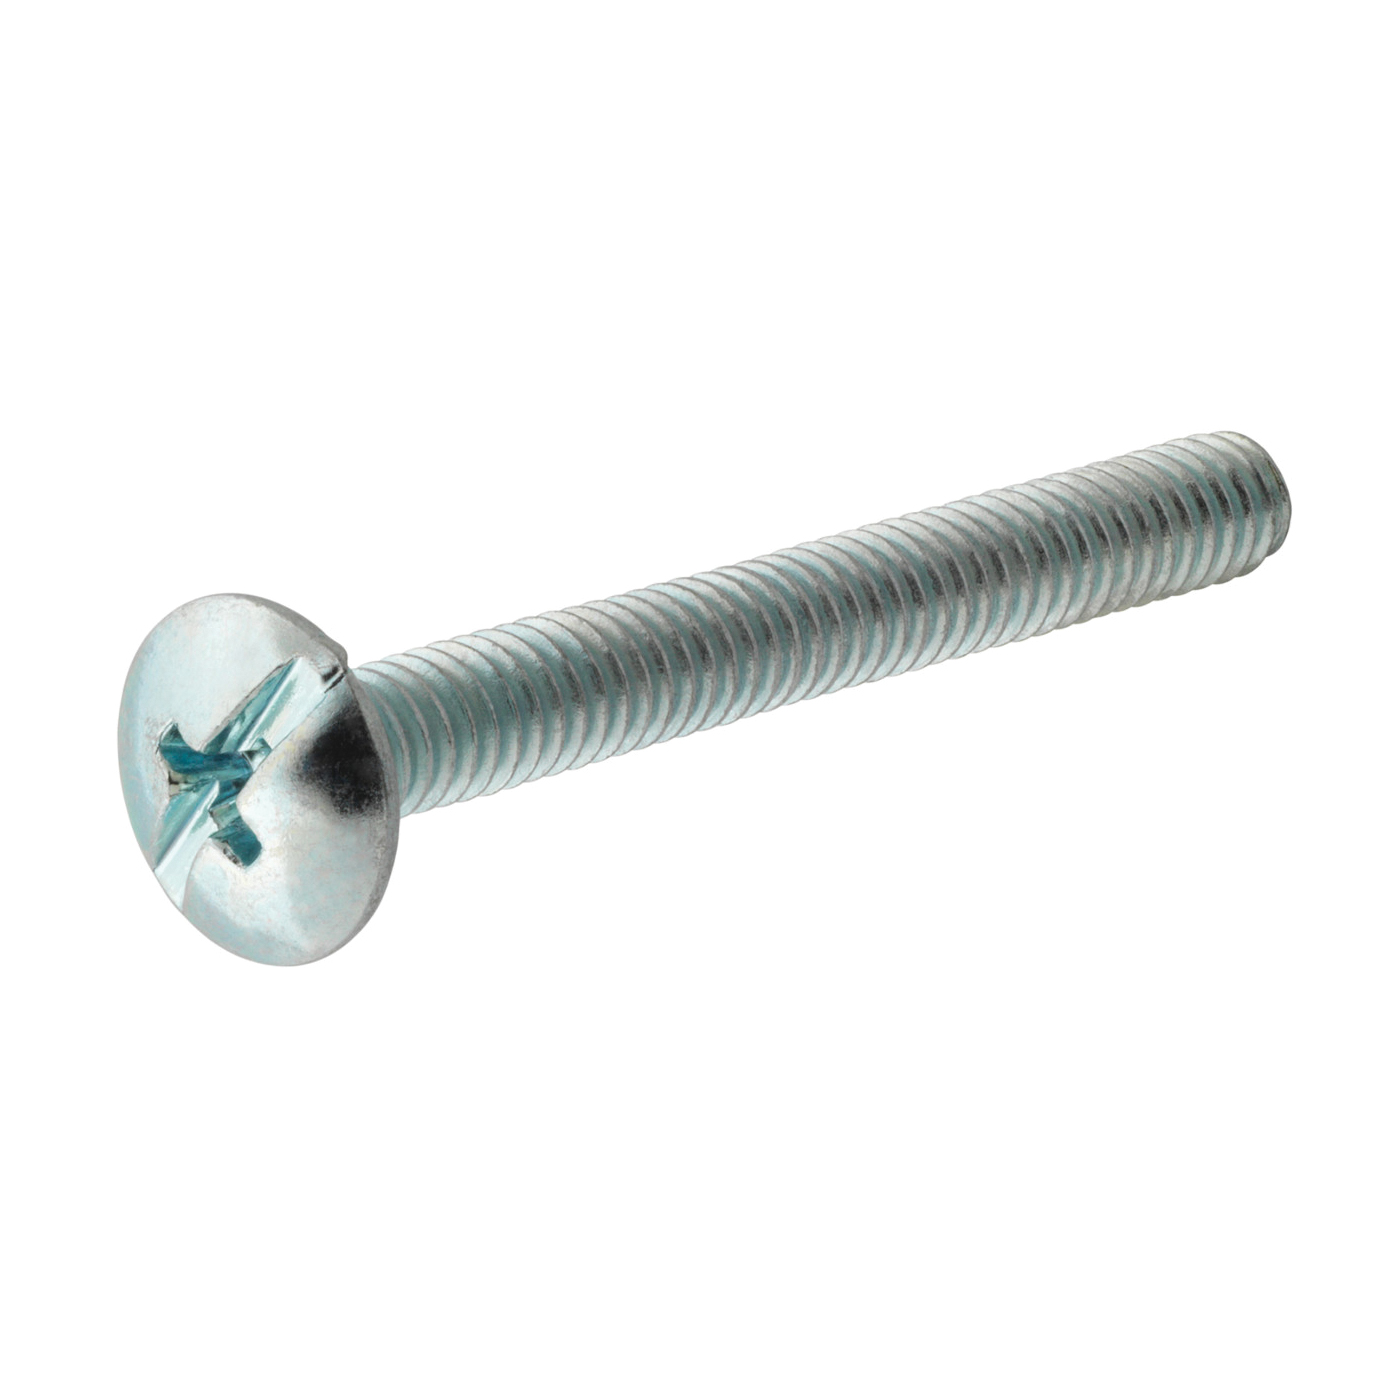 881045 Machine Screw, #8-32 Thread, 1 in L, Truss Head, Phillips, Slotted Drive, Stainless Steel